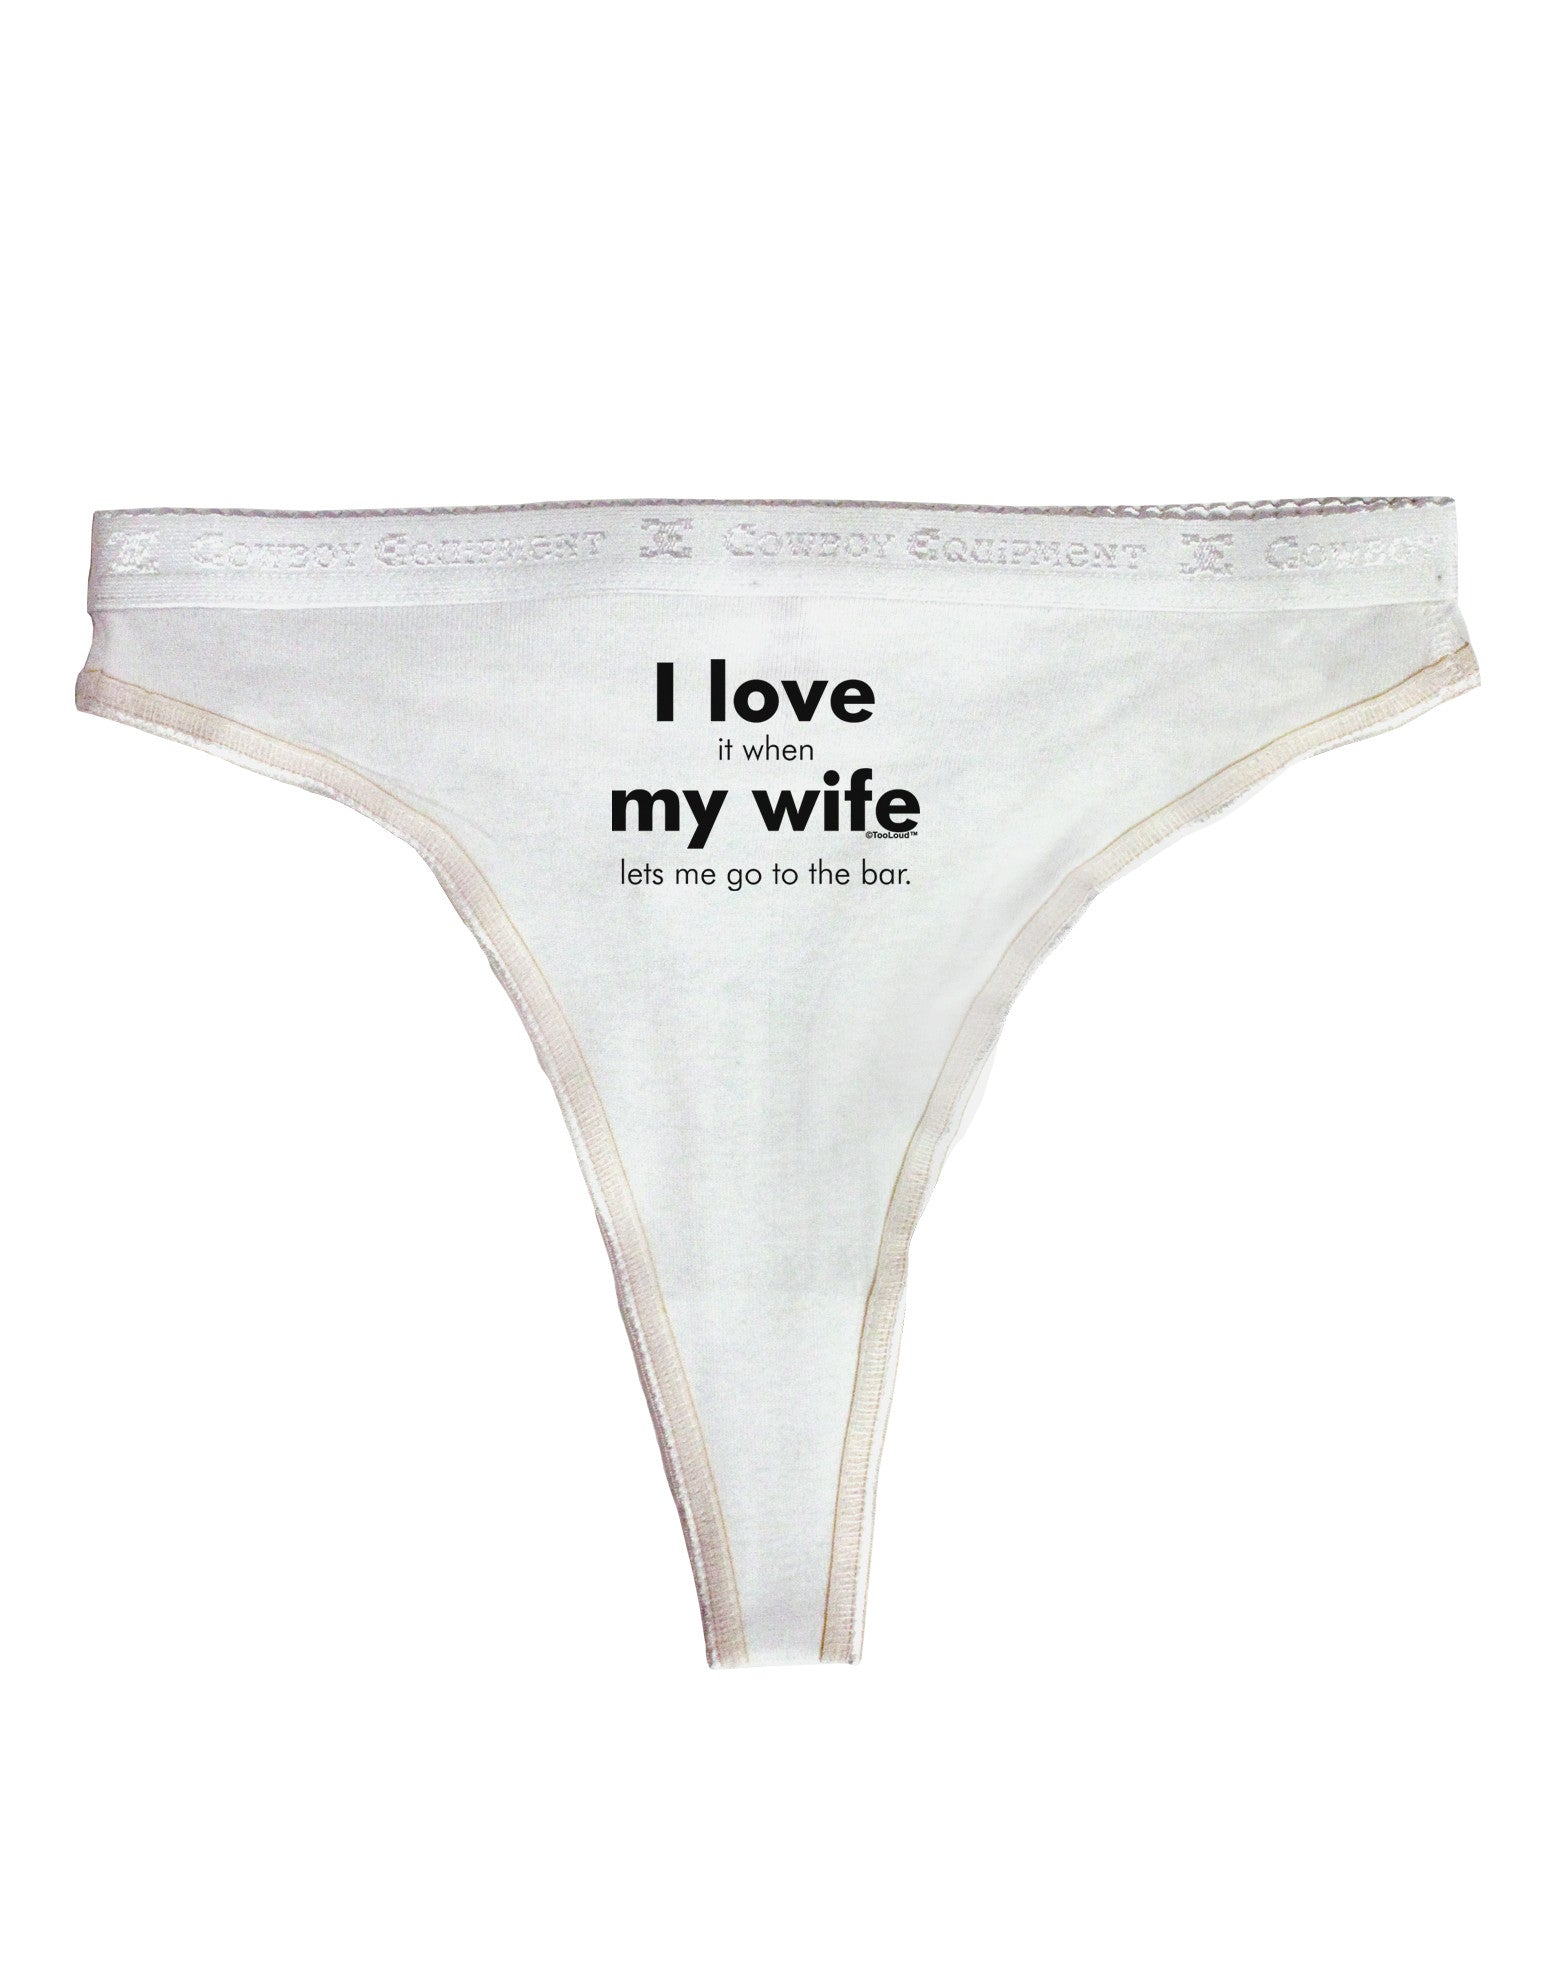  TooLoud I Heart My Awesome Wife Womens Thong Underwear